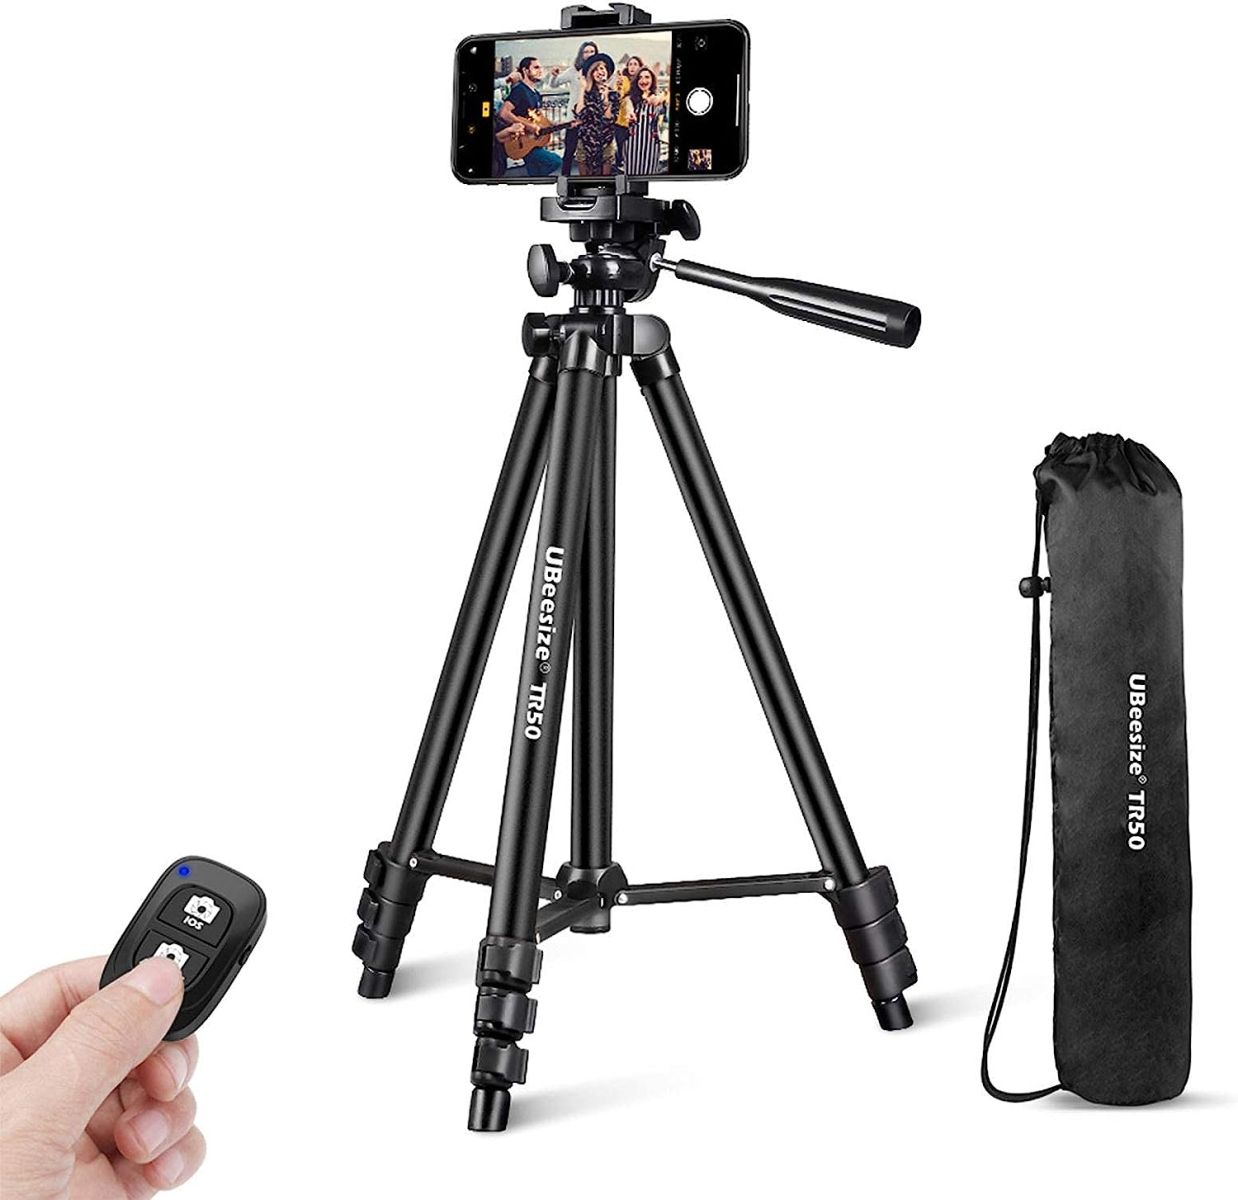 UBeesize Phone Tripod, 51" Adjustable Travel Video Tripod Stand with Cell Phone Mount Holder & Smartphone Bluetooth Remote(Black